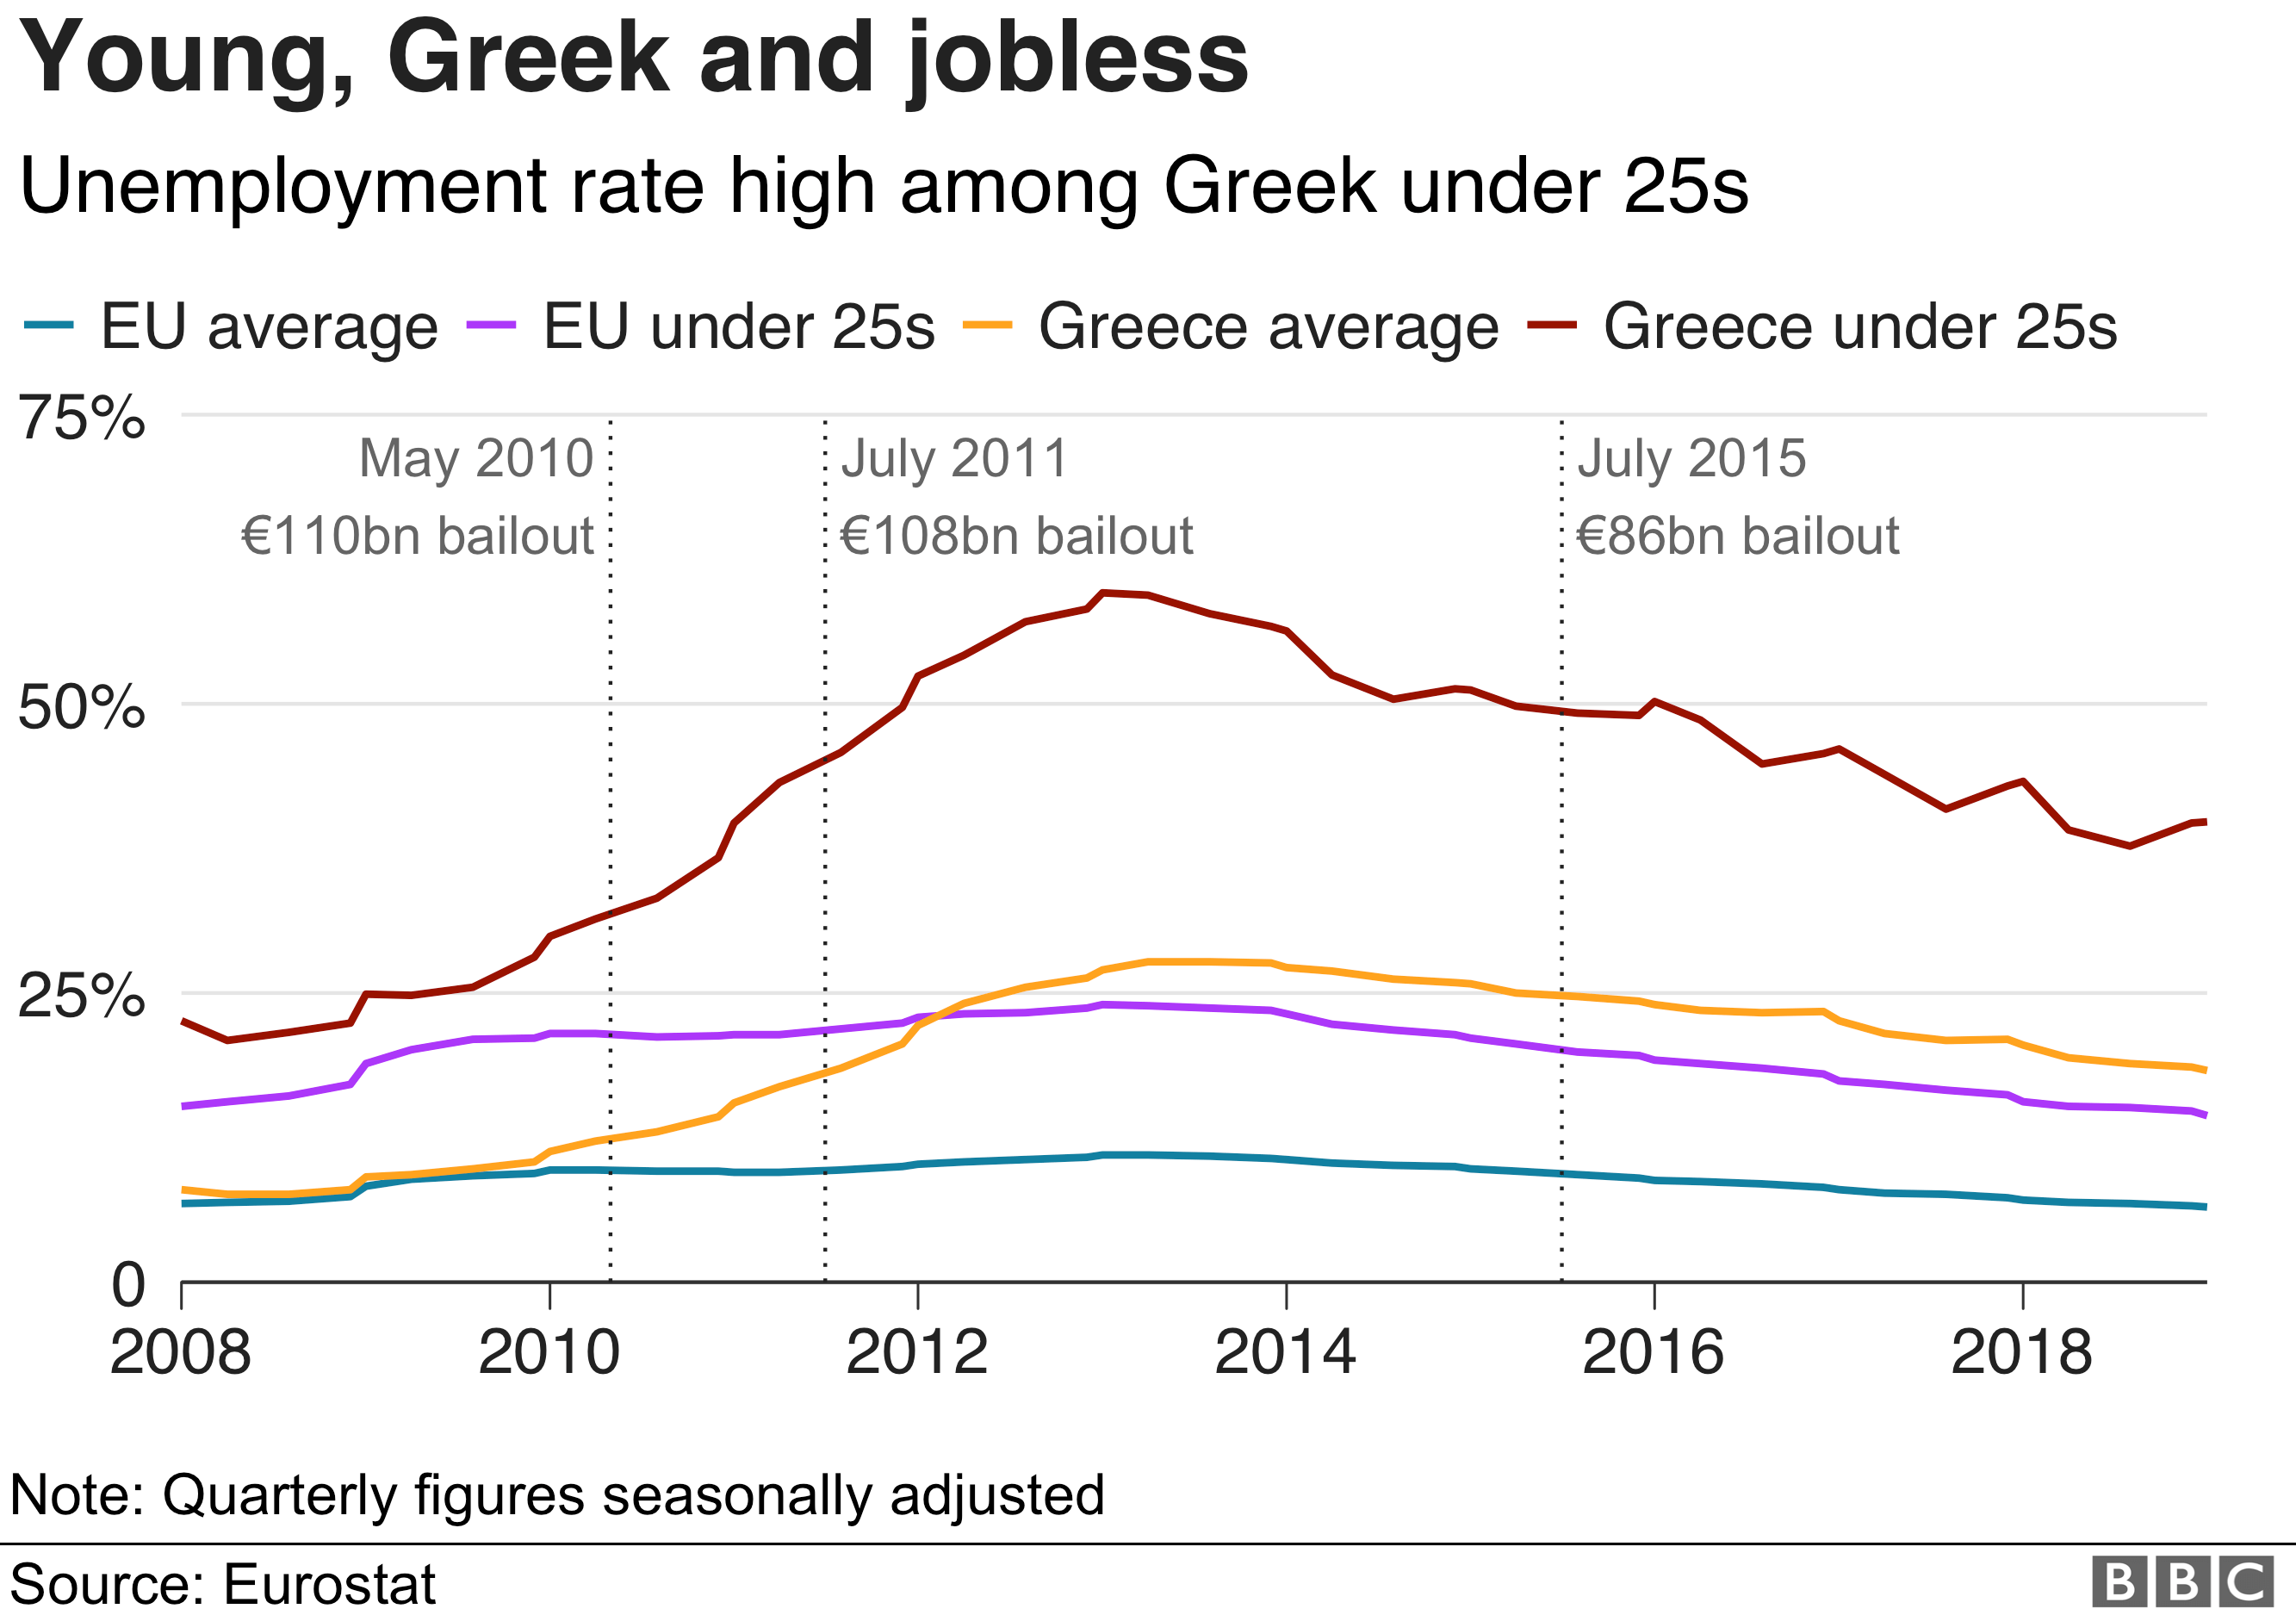 A chart shows youth unemployment rates in Greece with the dates of three major bailout packages marked for comparison